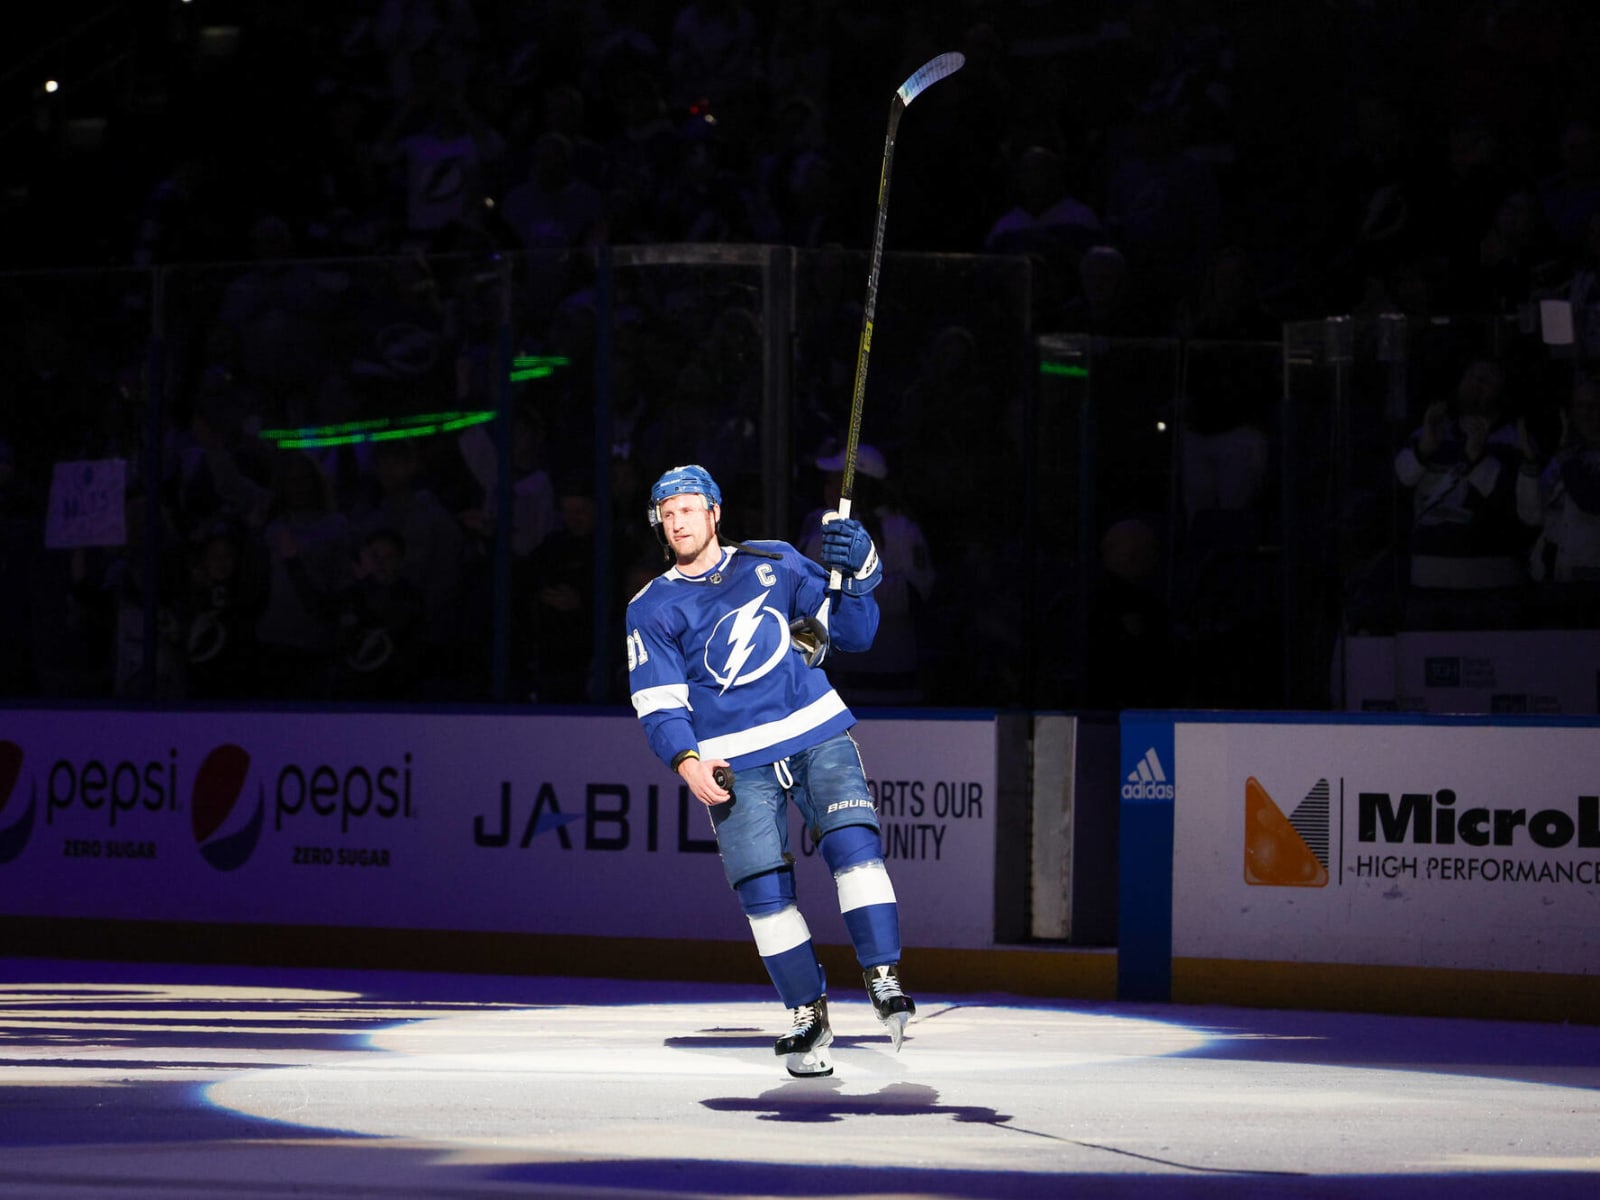 NHL99: Steven Stamkos evolved from a scorer into a complete player — and  champion - The Athletic